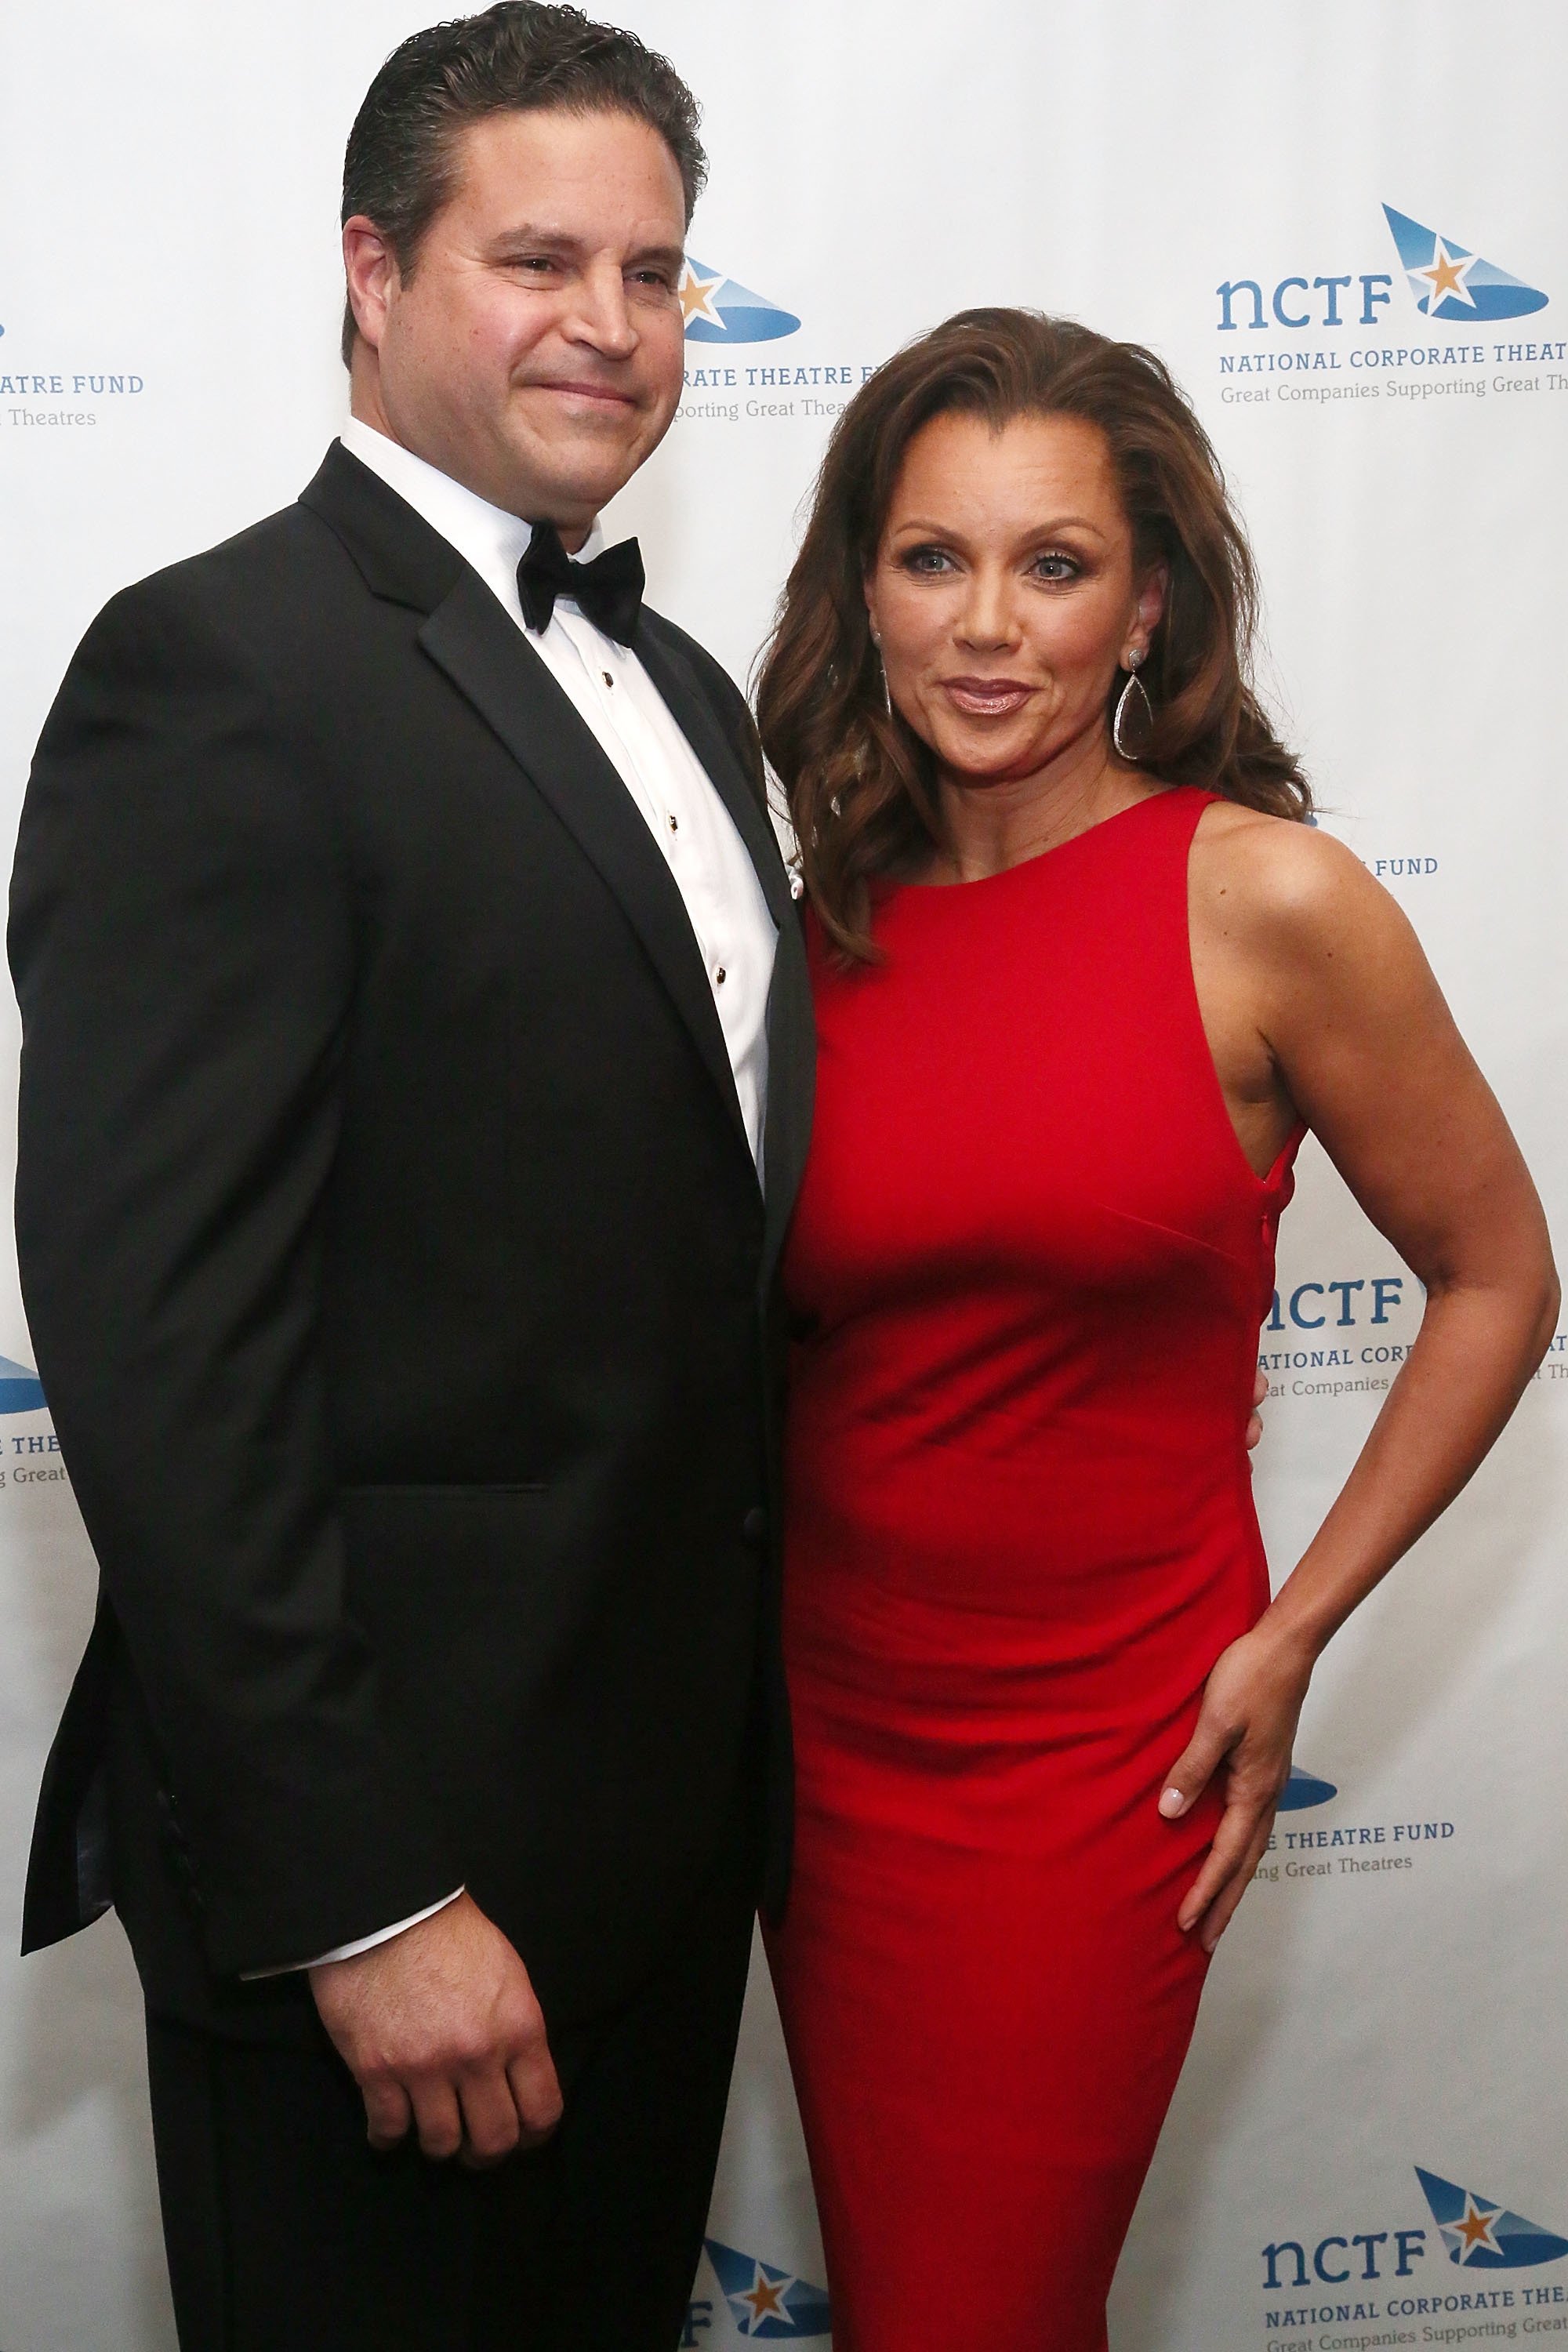 Jim Skrip and actress Vanessa Williams, wearing a dress designed by Azadeh attend the National Corporate Theatre Fund 2013 Chairman's Award Gala at The Pierre Hotel on April 29, 2013 | Photo: Getty Images